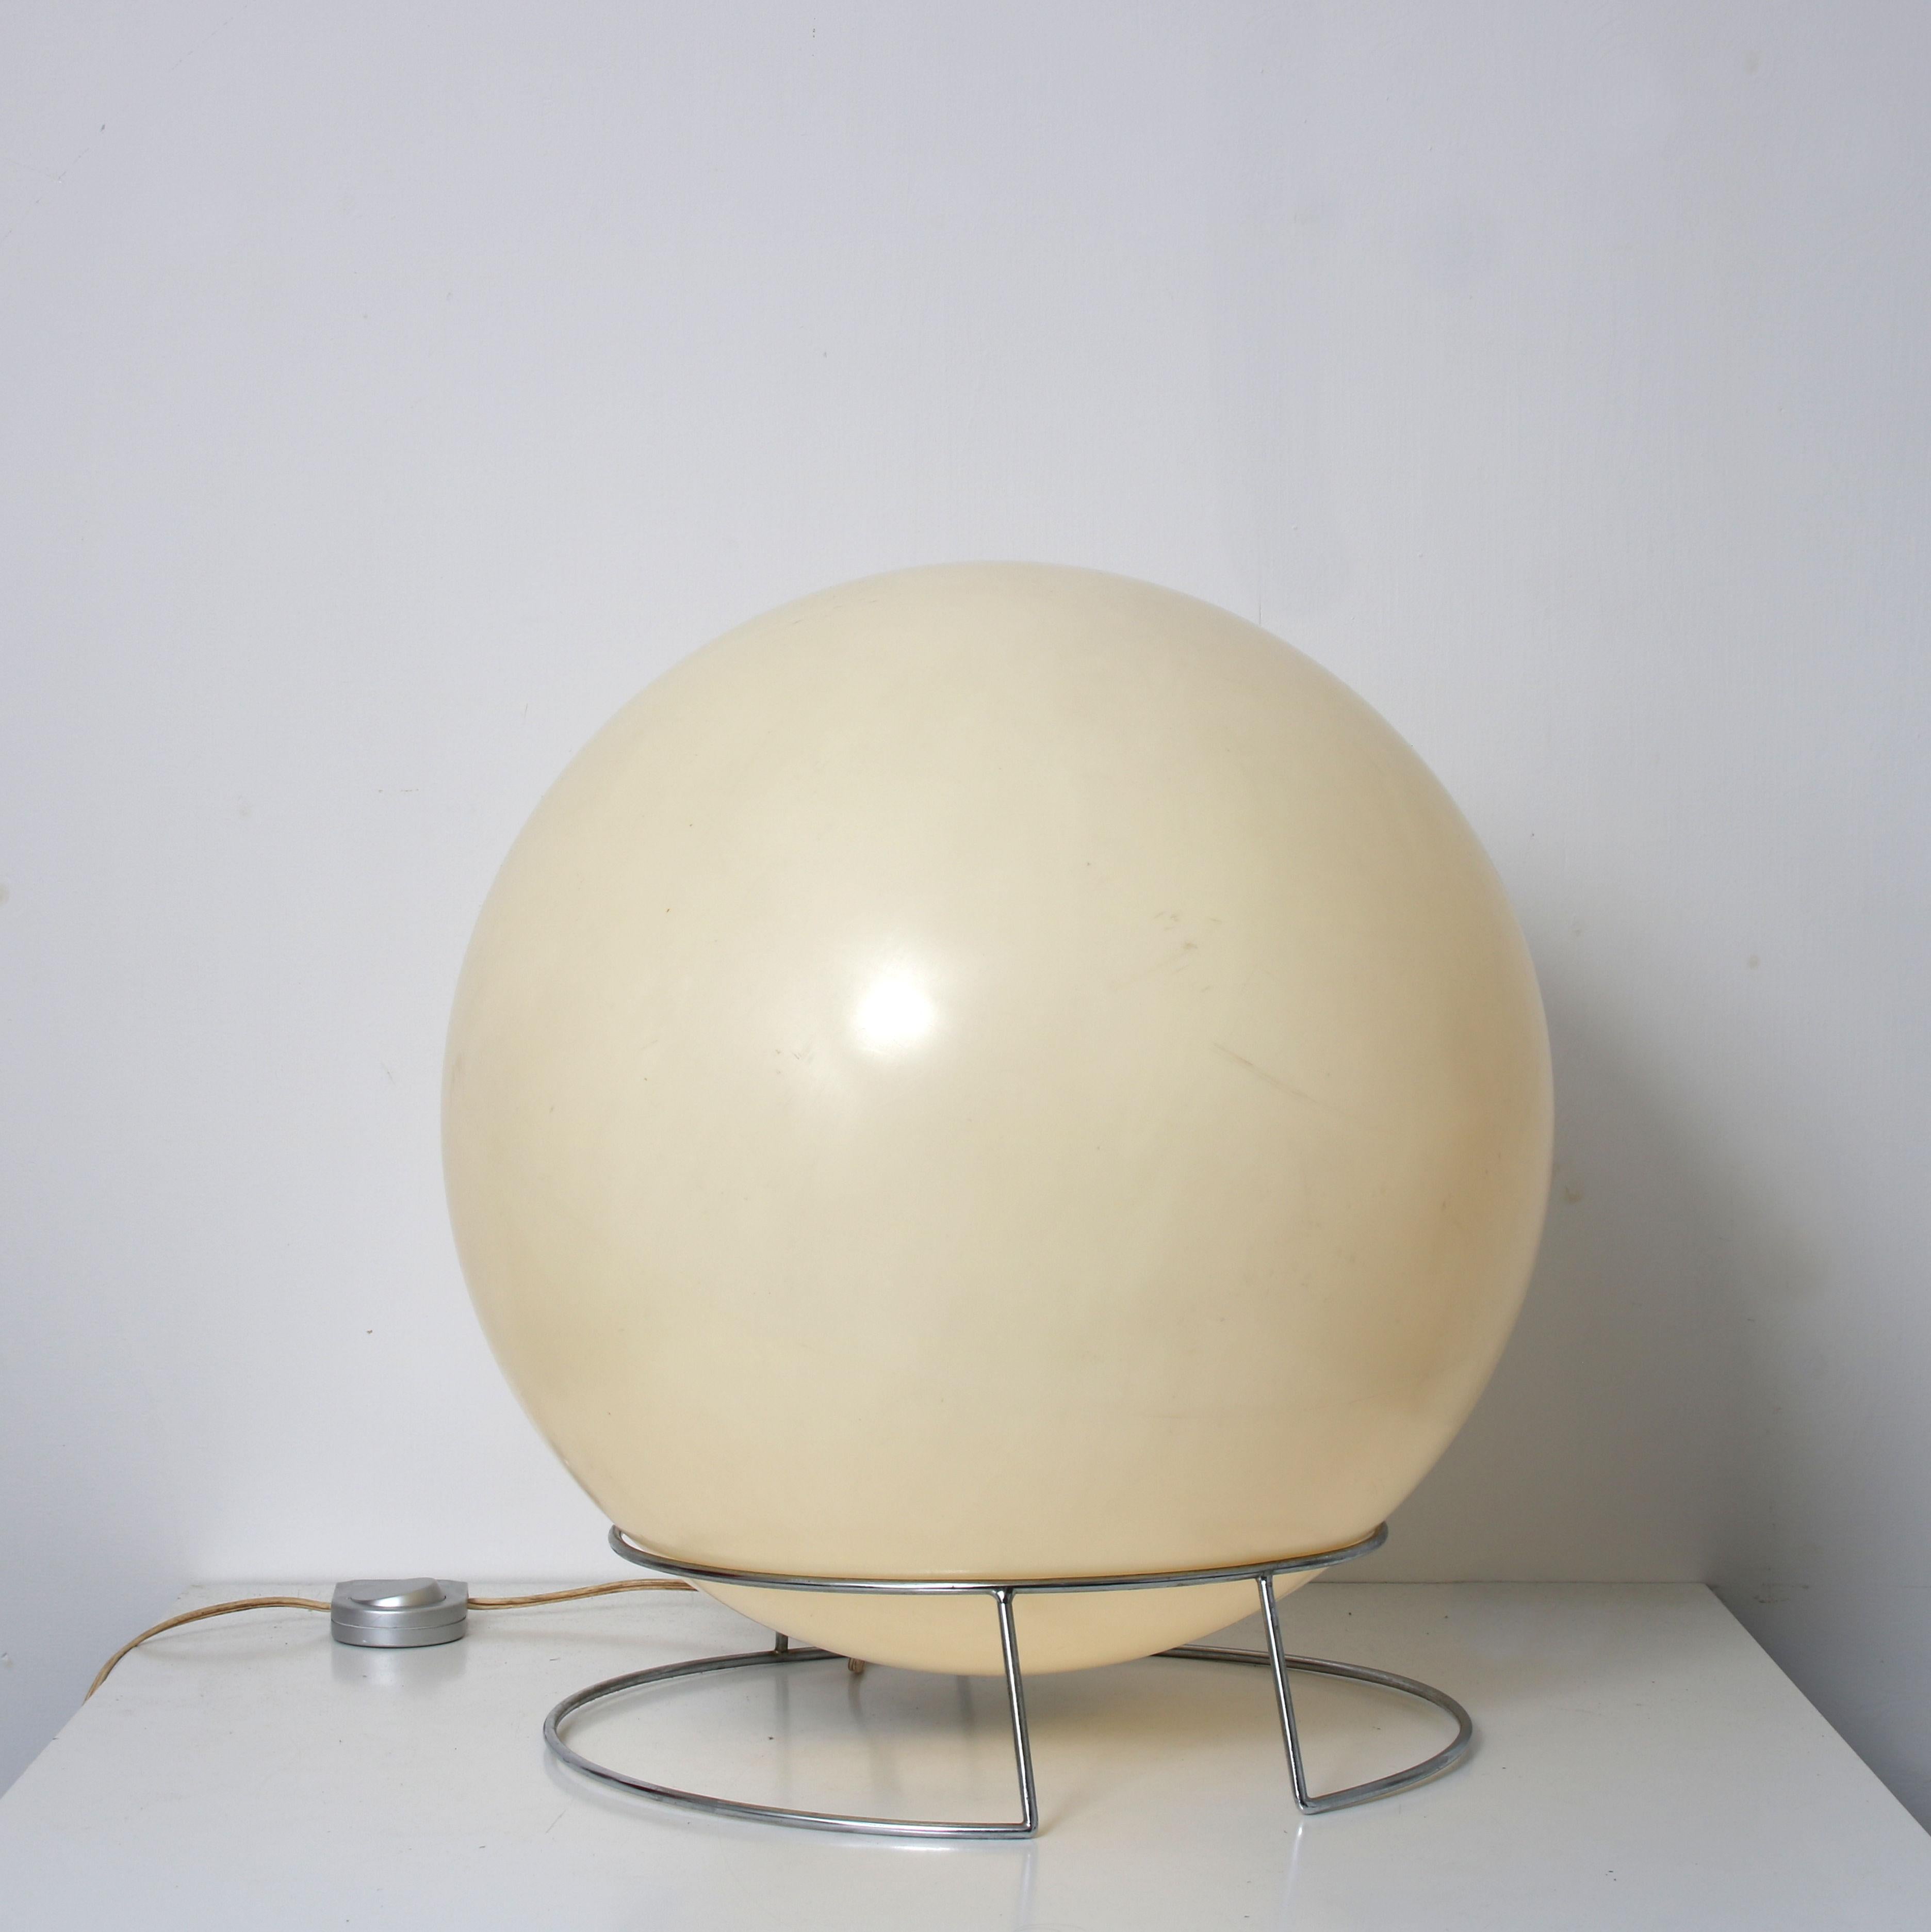 An eye-catching table or floor lamp, model “Saturnus”, manufactured by Raak in the Netherlands in 1971.

This rare piece was produced only in that year, and is therefore really hard to find! It’s is a really beautiful piece, made of a large plastic